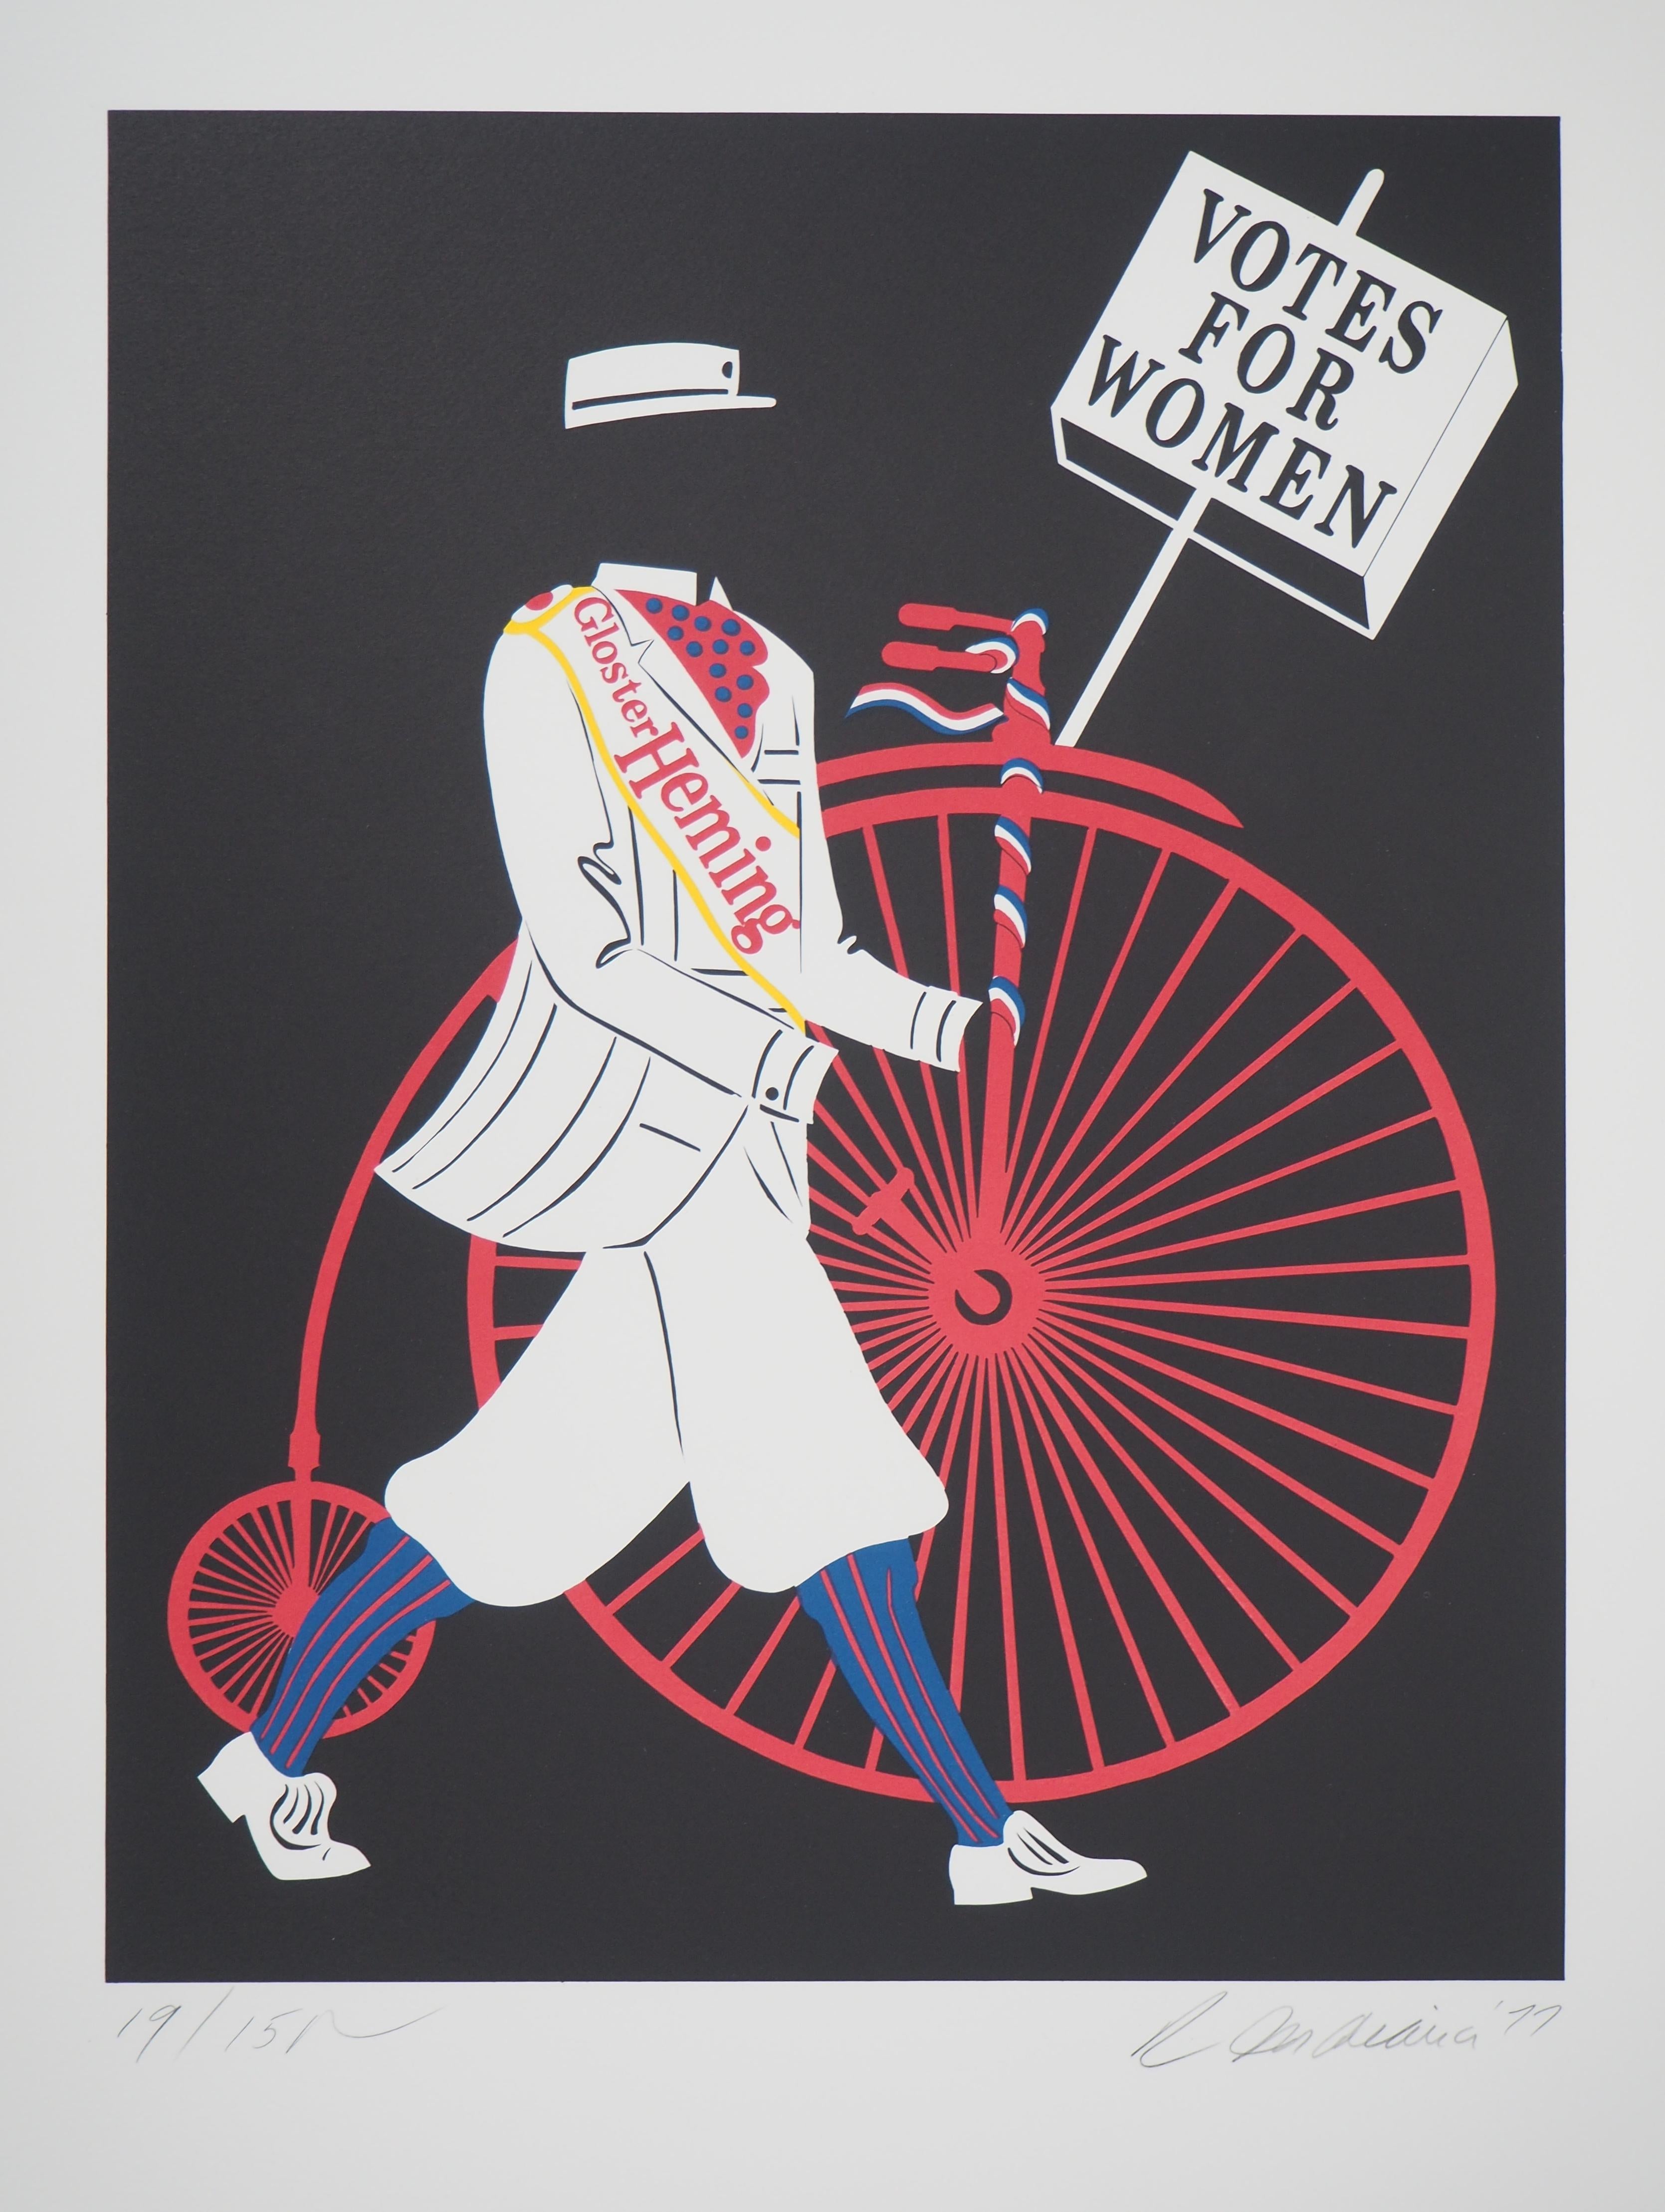 Votes for Women - Original lithograph, Handsigned and numbered / 150 - American Modern Print by Robert Indiana